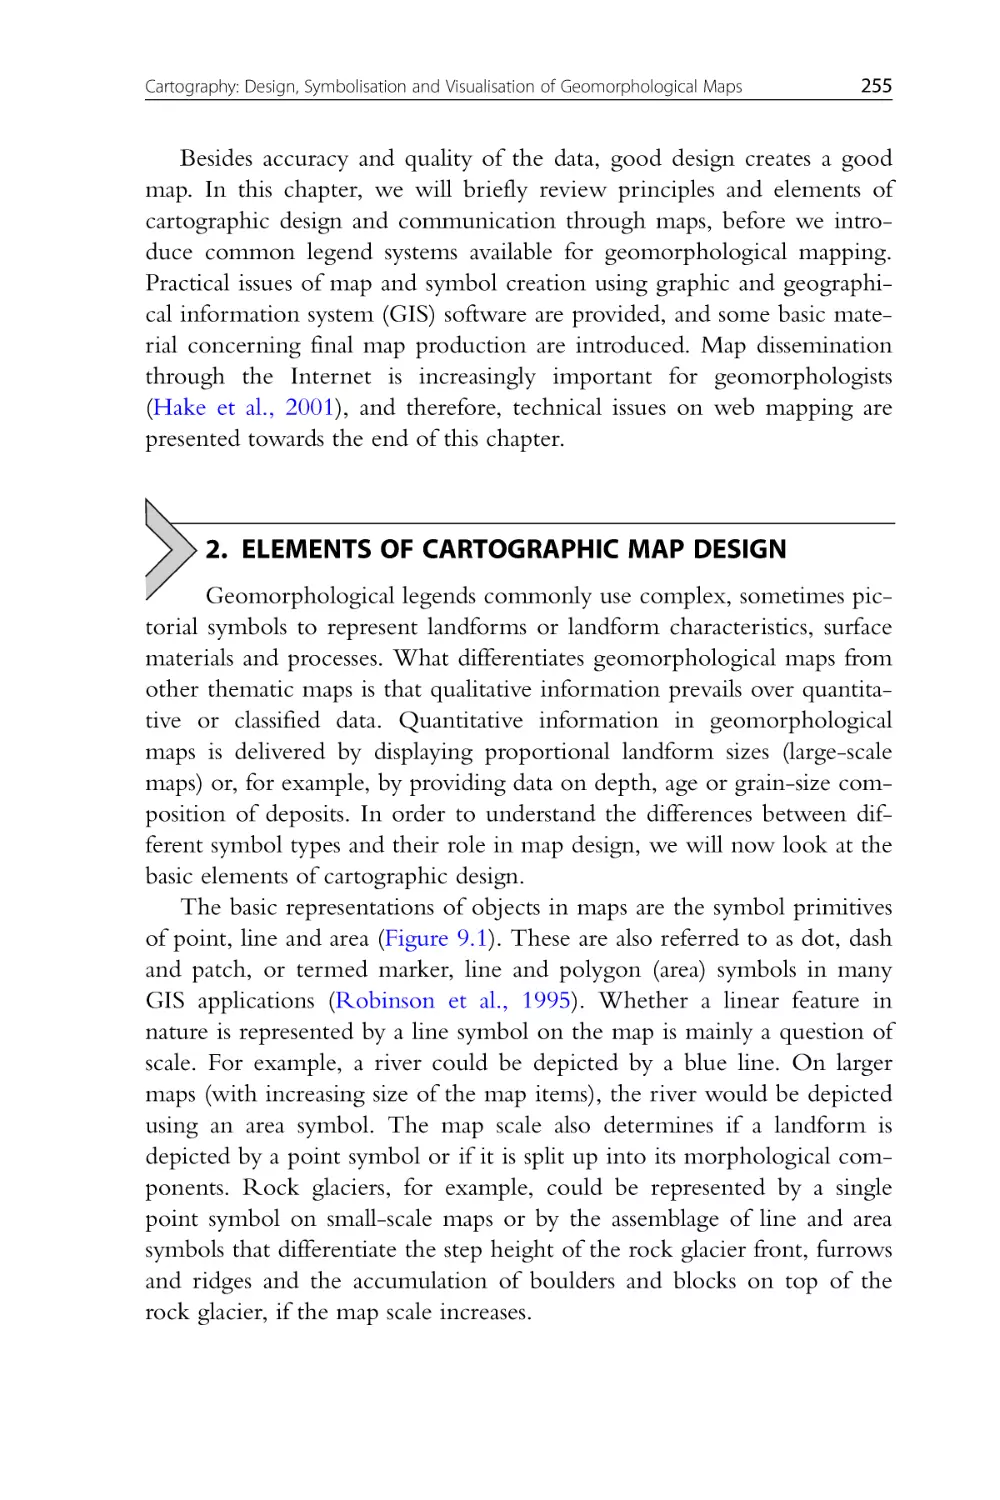 2. Elements of Cartographic Map Design